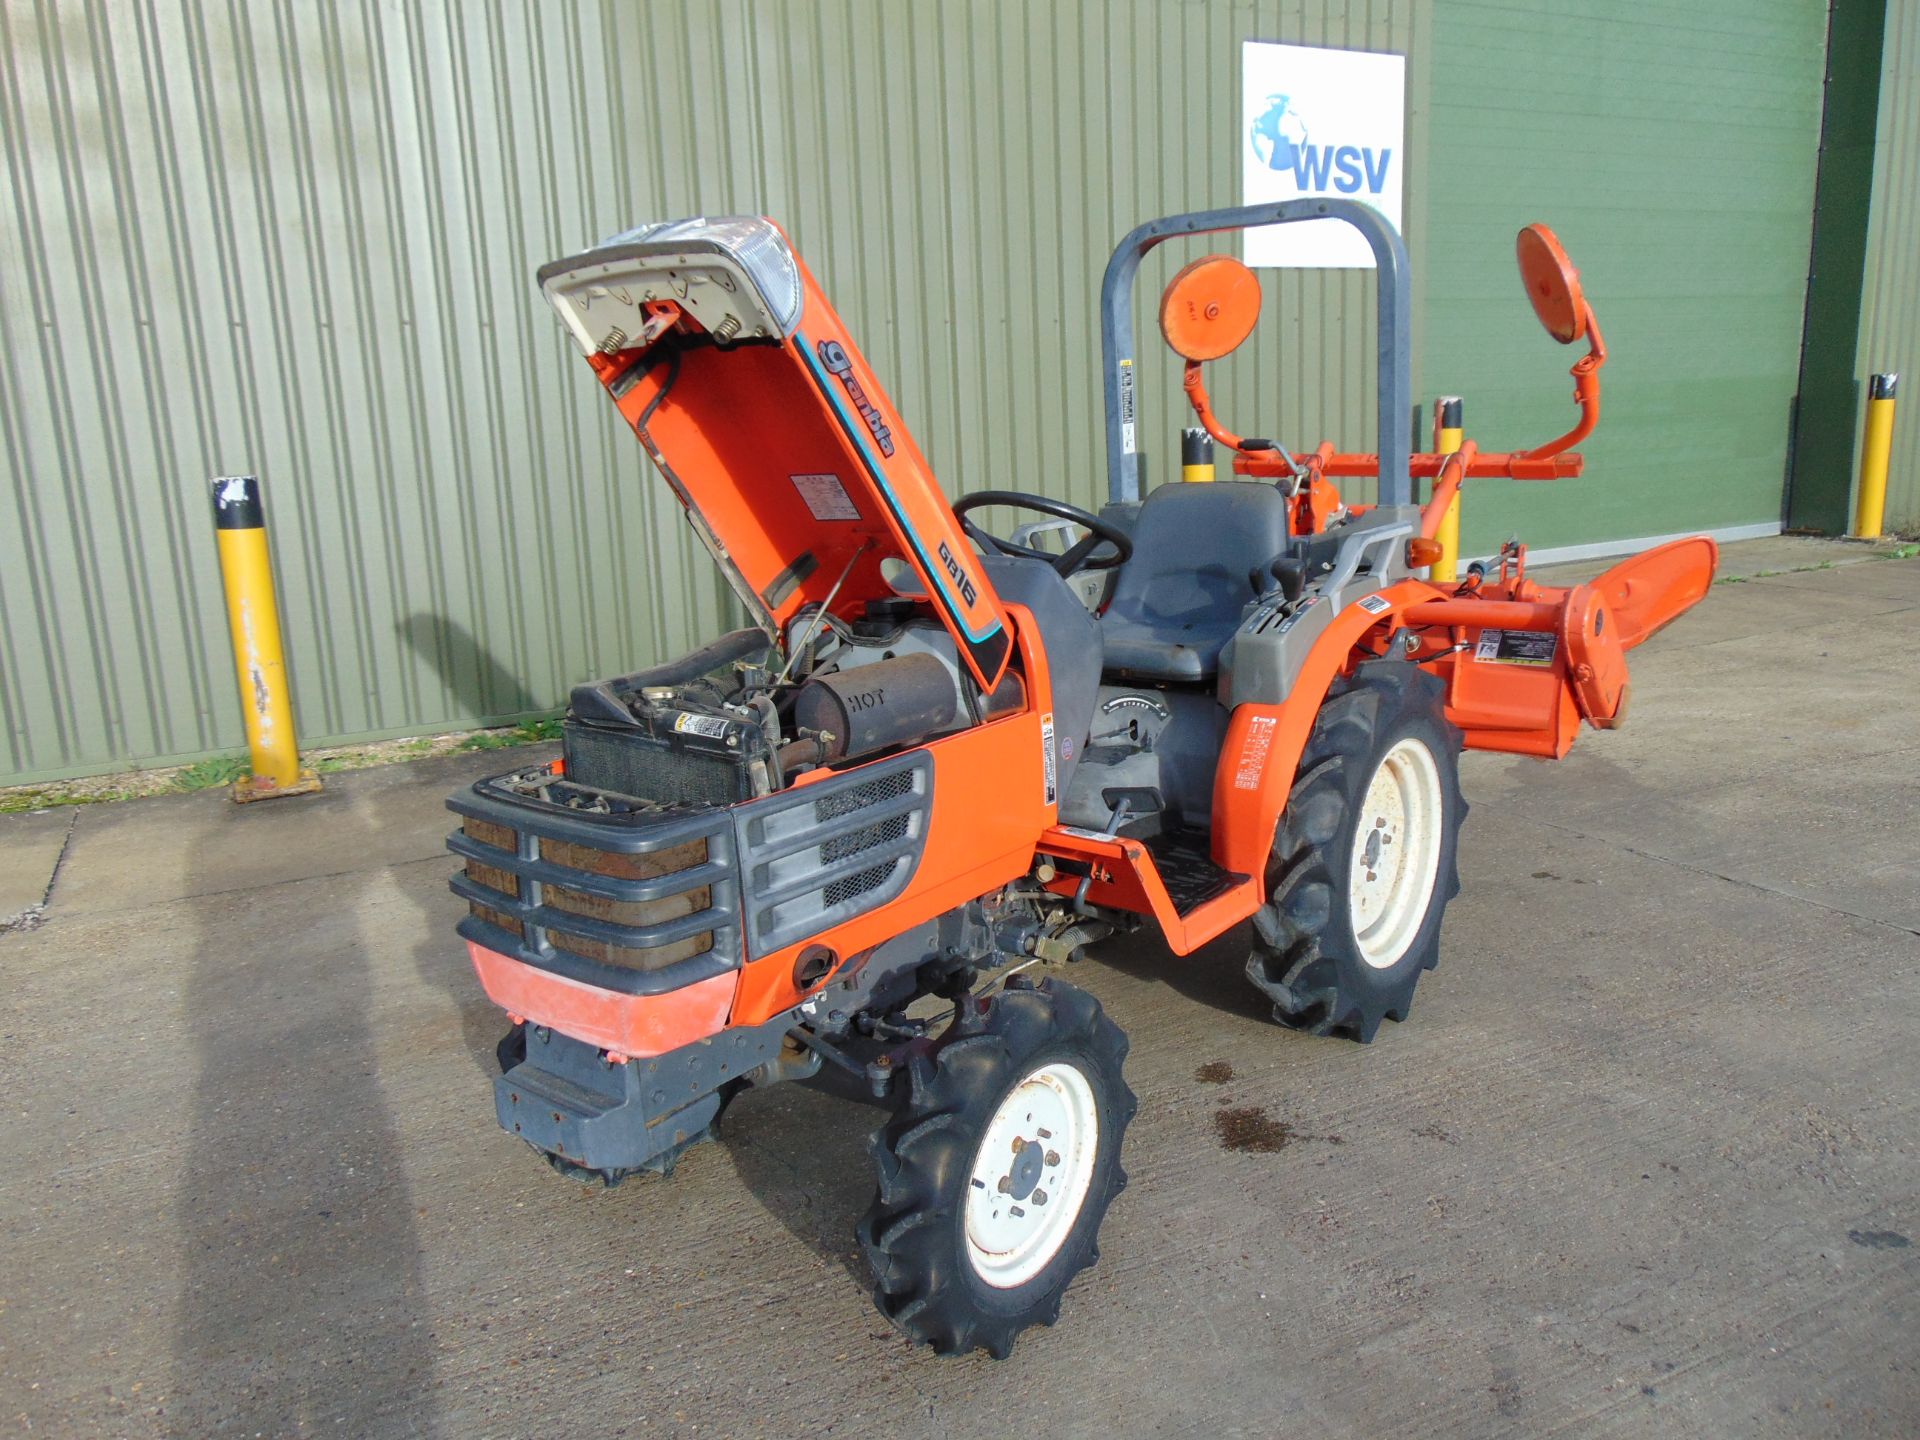 Kubota Granbia GB16 4x4 Diesel Compact Tractor c/w Rotovator ONLY 467 HOURS! - Image 22 of 24